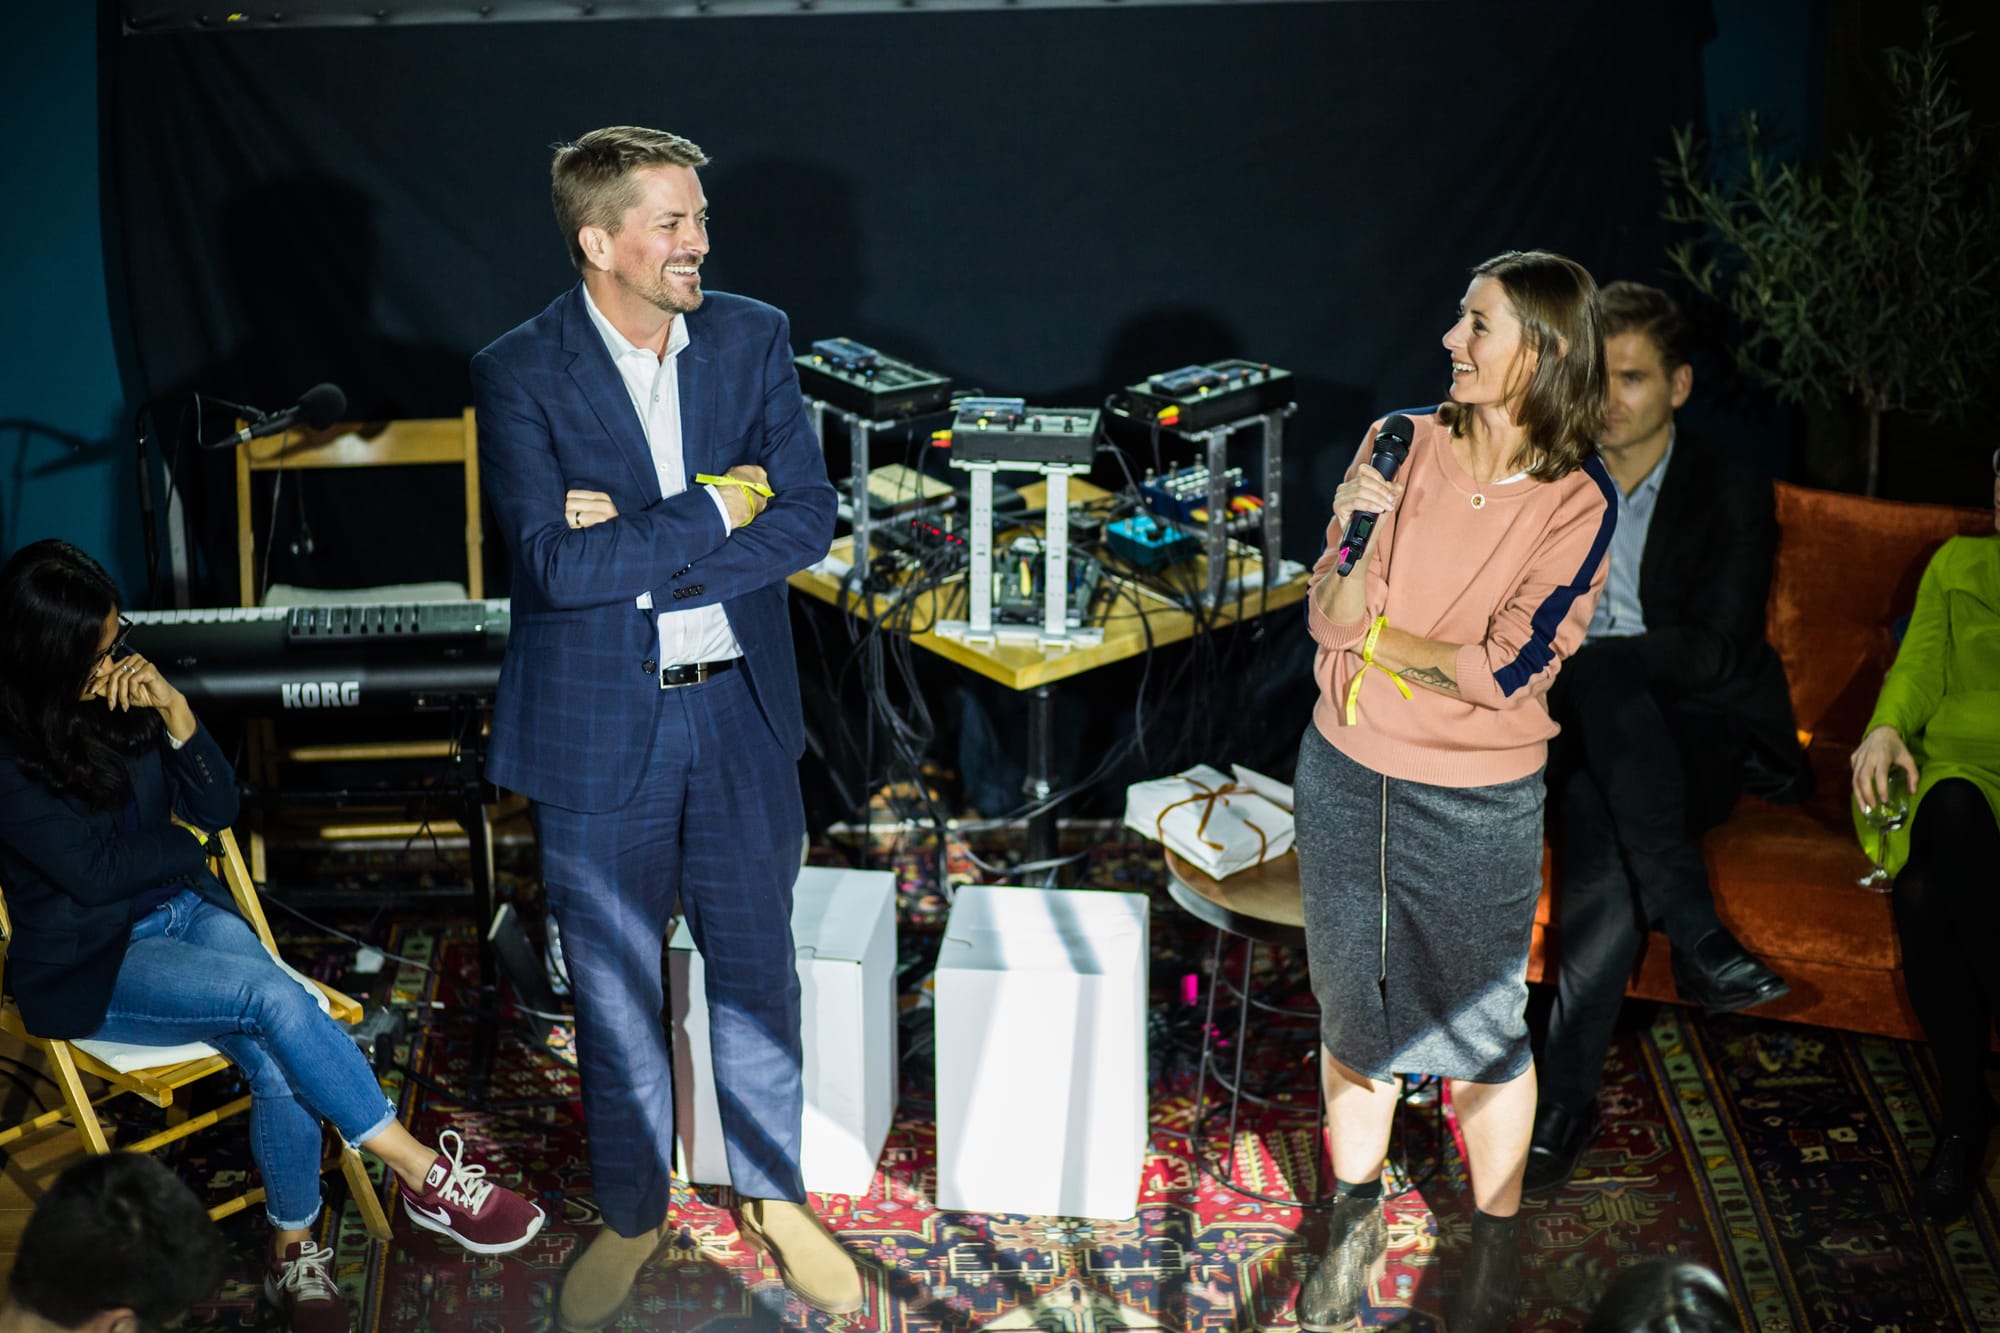 Helen and Dave Edwards speaking at the House of Beautiful Business 2018